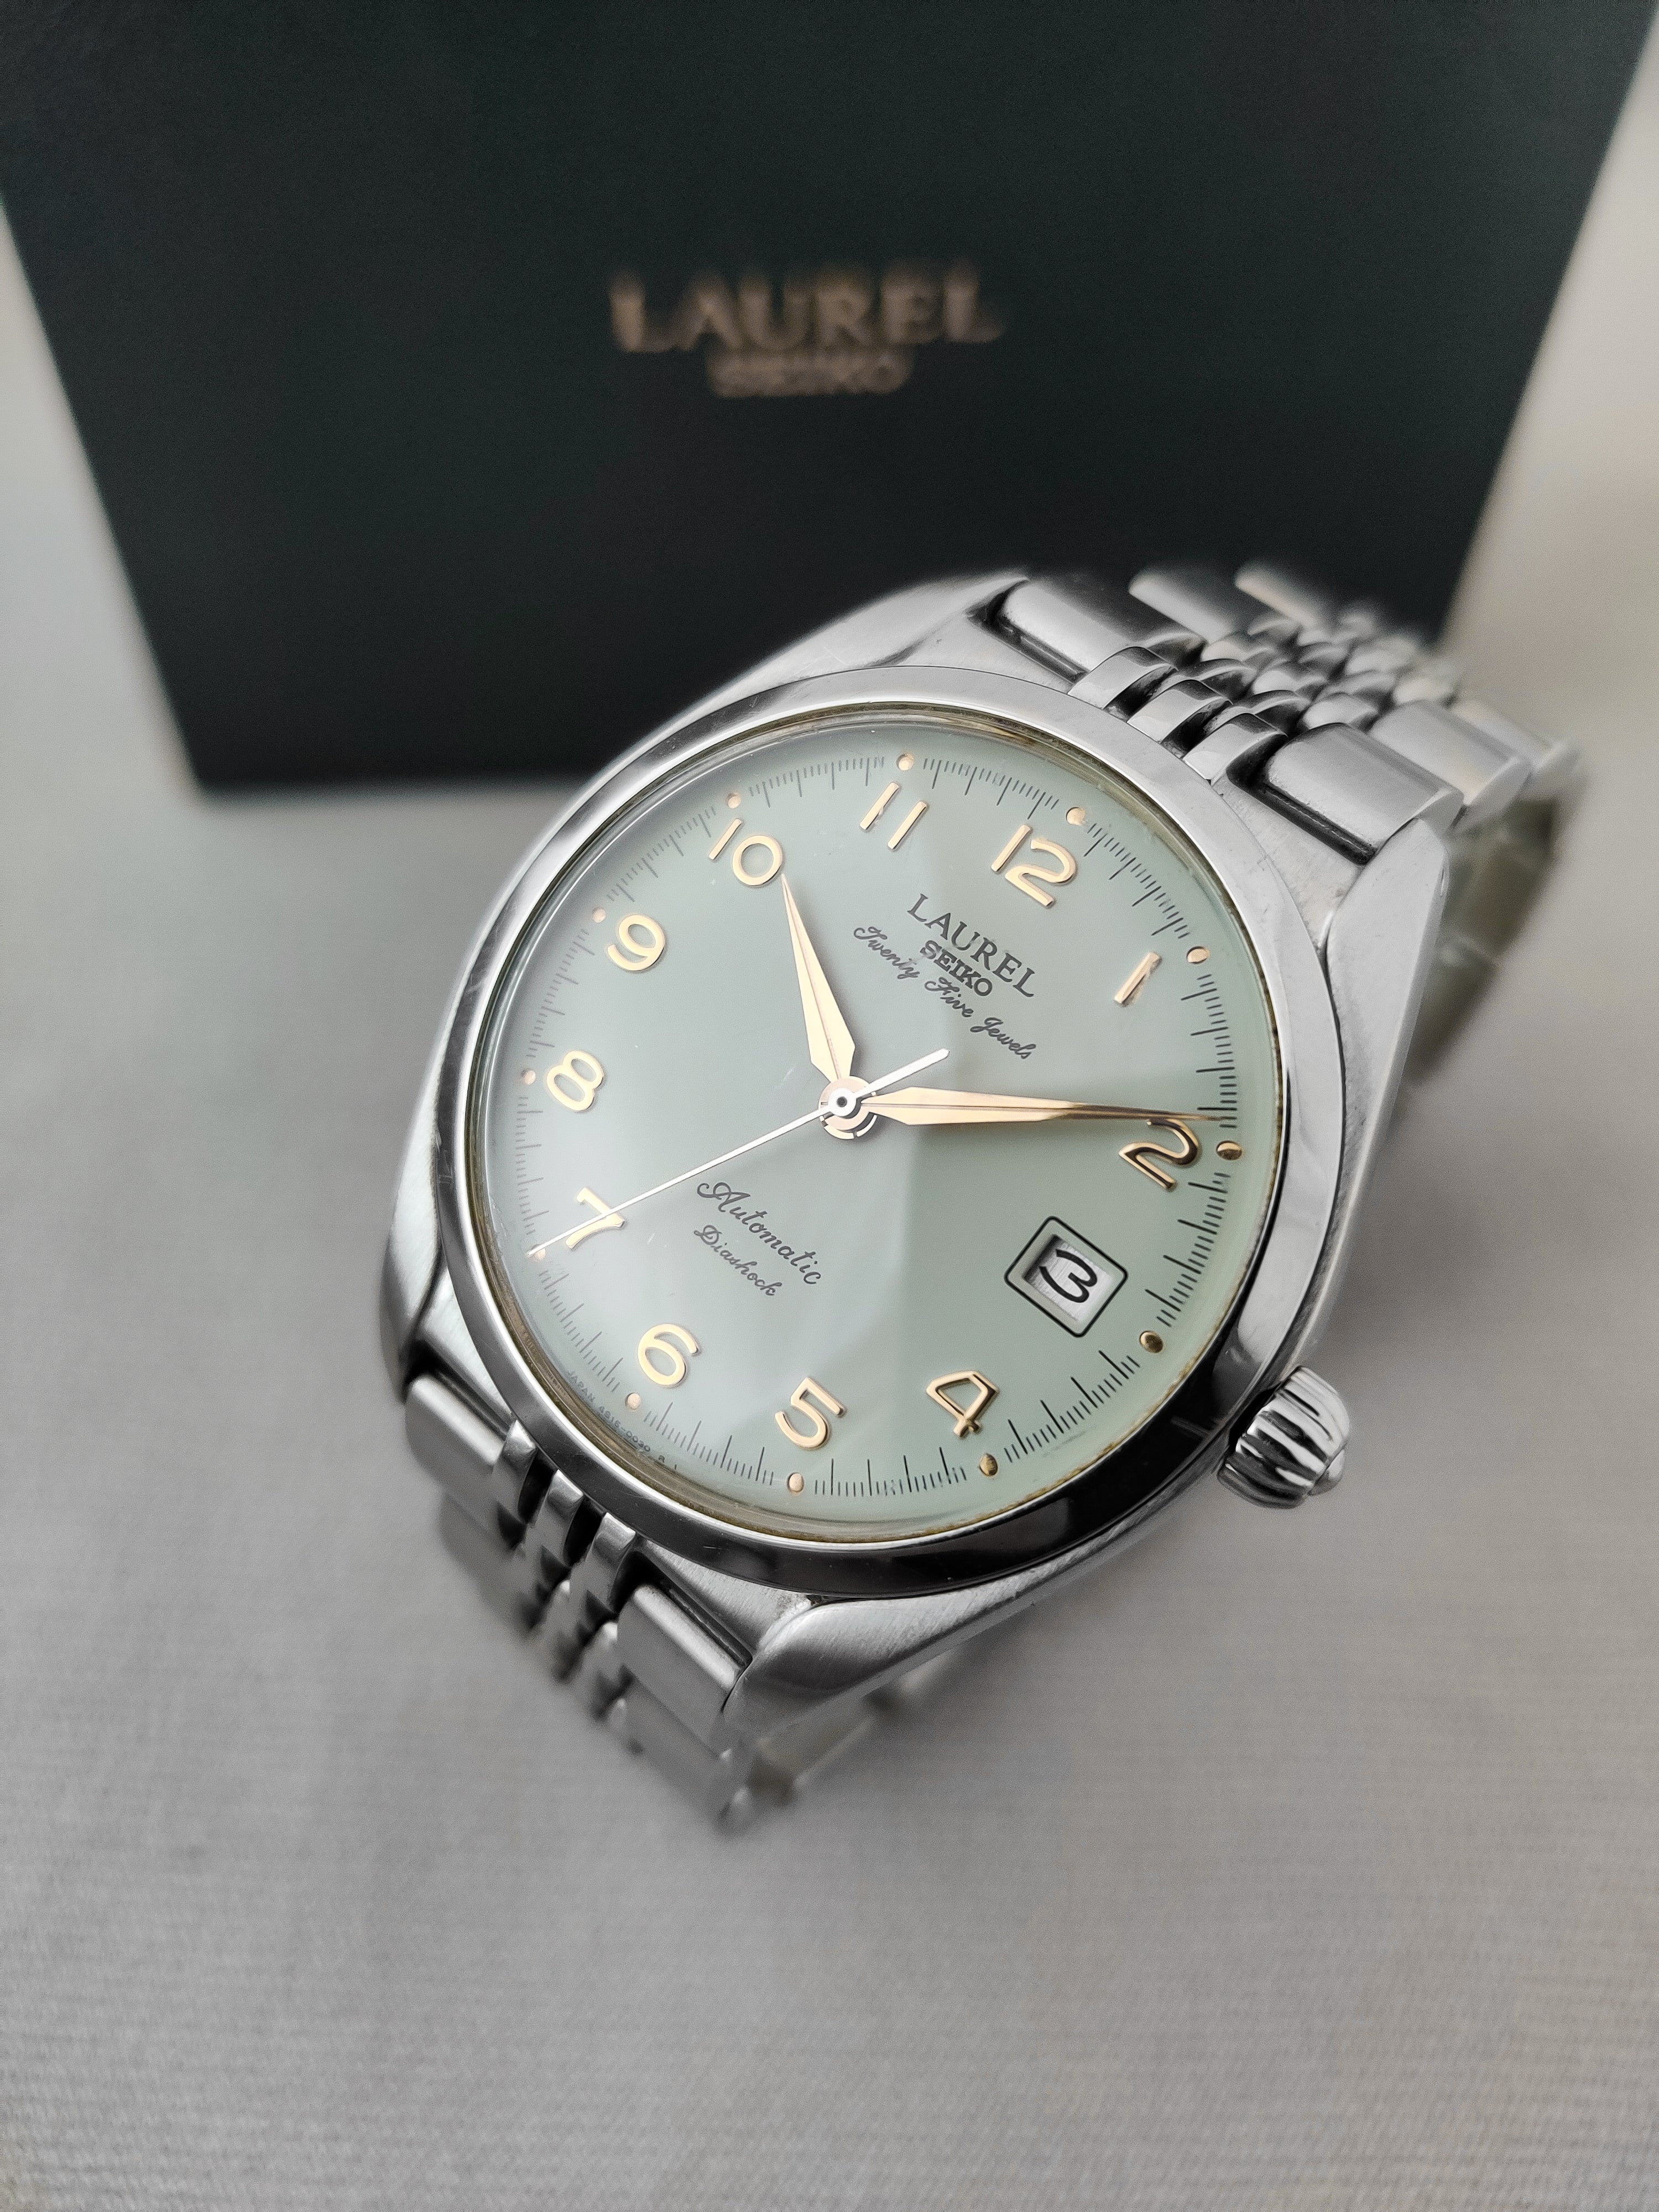 Seiko Laurel LHAM601 from 1996 (Box and papers) – Paleh